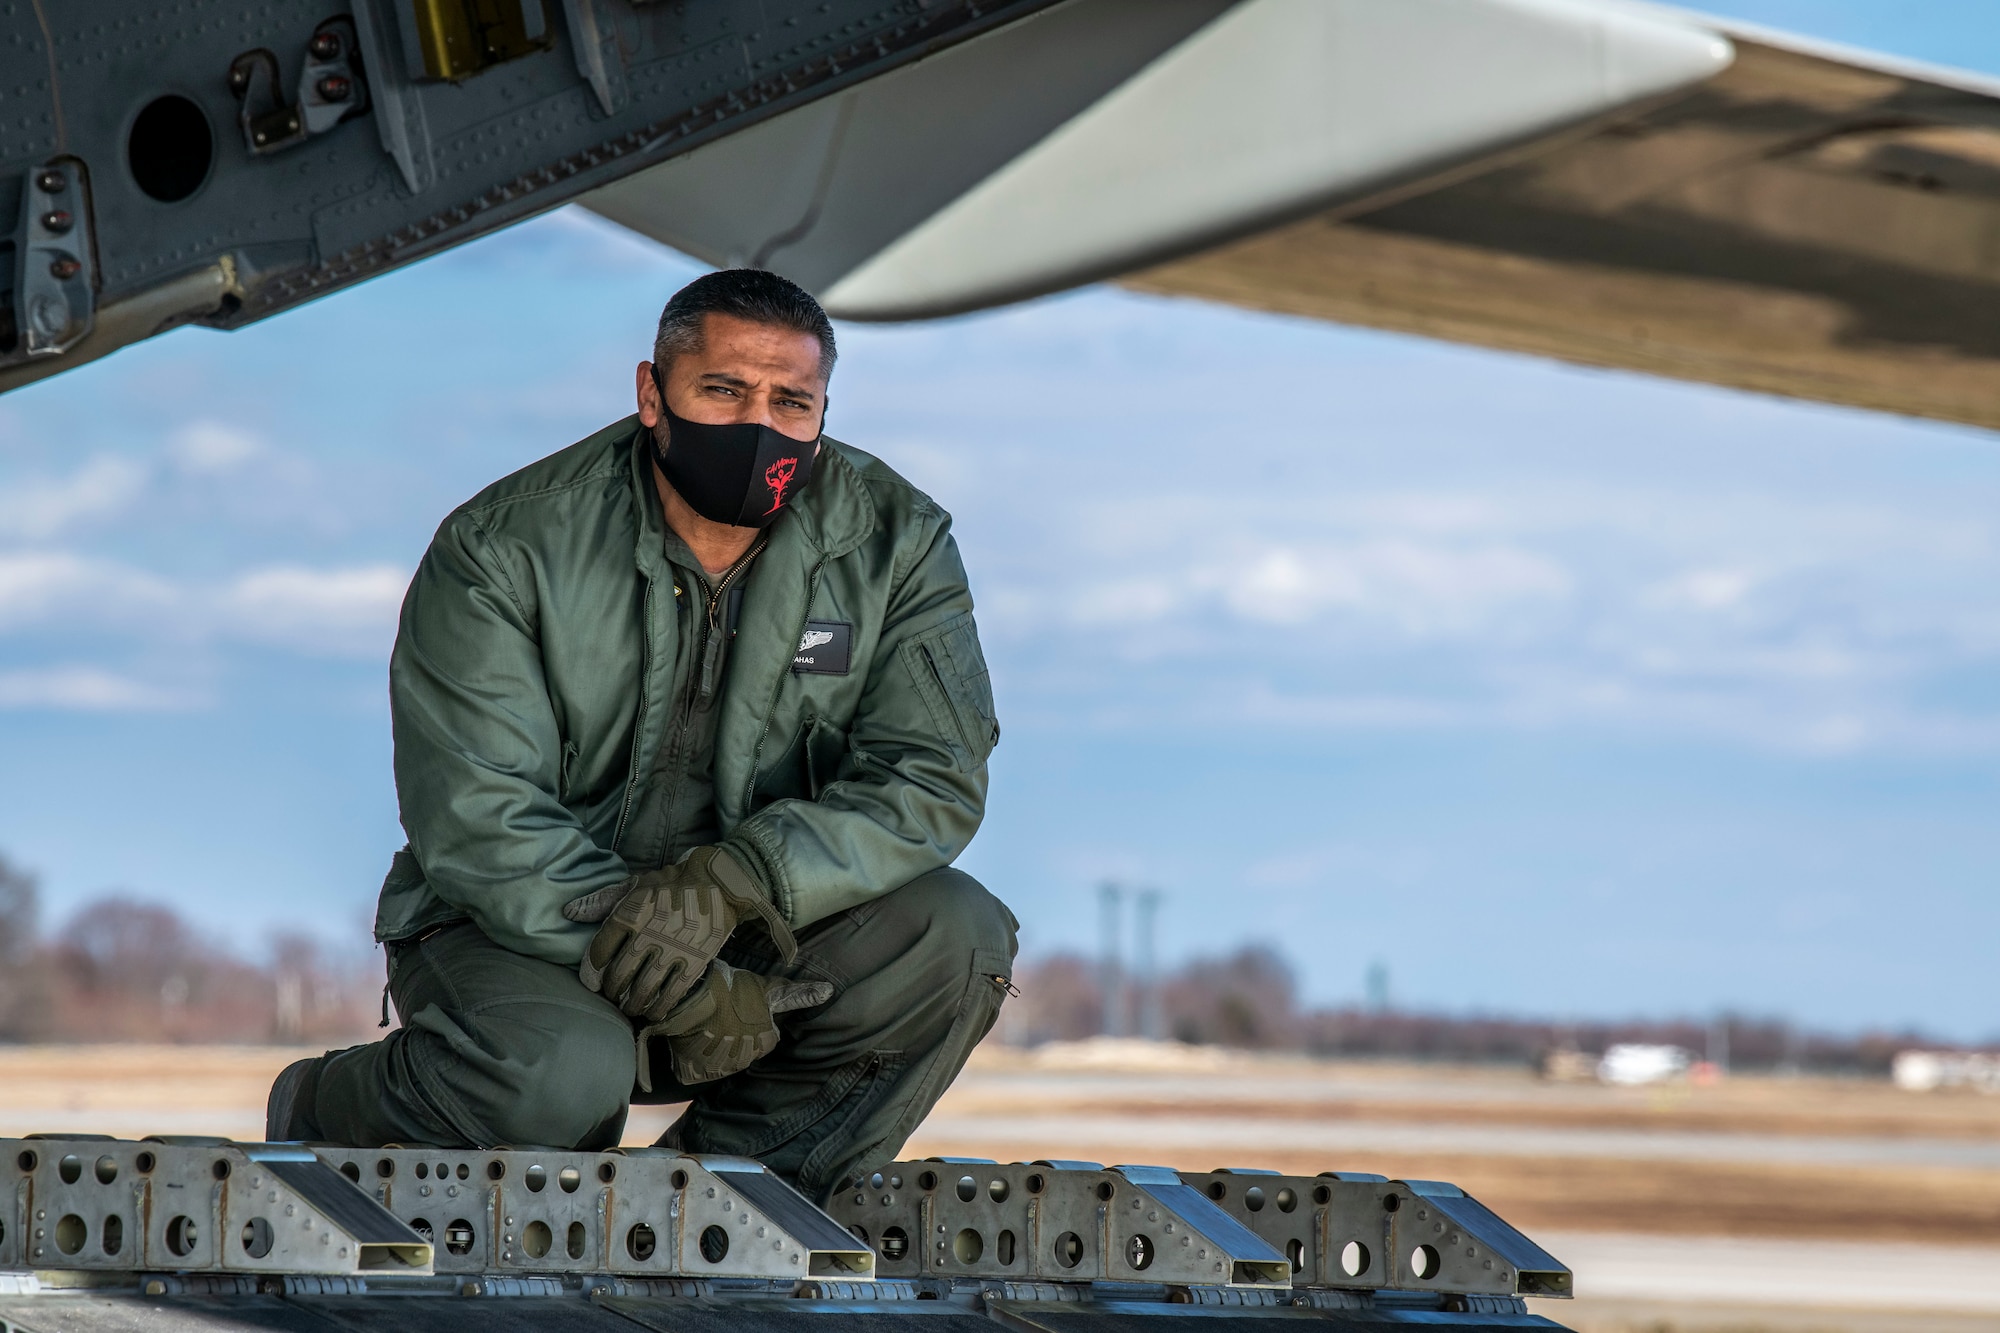 A Kuwait air force airman looks out of the ramp of a Kuwait air force C-17 Globemaster III at Dover Air Force Base, Delaware, Jan. 22, 2021. The U.S. strongly supports Kuwait’s sovereignty, security and independence as well as its multilateral diplomatic efforts to build greater cooperation in the region. Due to its strategic geographic location, Dover AFB supports approximately $3.5 billion worth of foreign military sales operations annually. (U.S. Air Force photo by Senior Airman Christopher Quail)